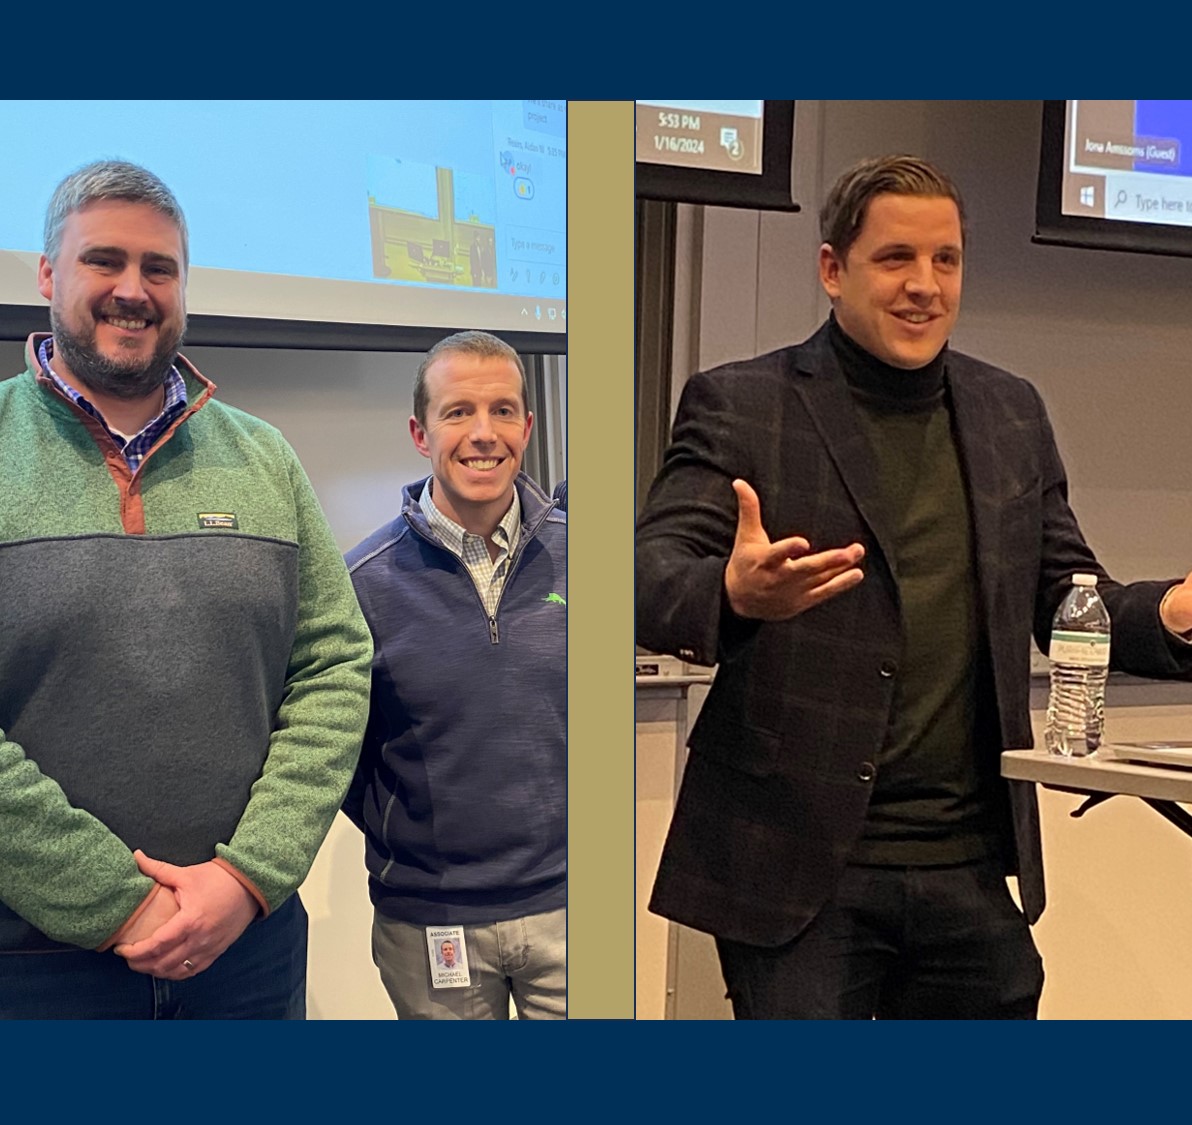 James Dorris and Michael Carpenter from Home Depot and Jona Amssoms from Spark Technologies brought the working world into the classroom as they unveiled an introduction of their semester-long data challenge to business analytics practicum students.  